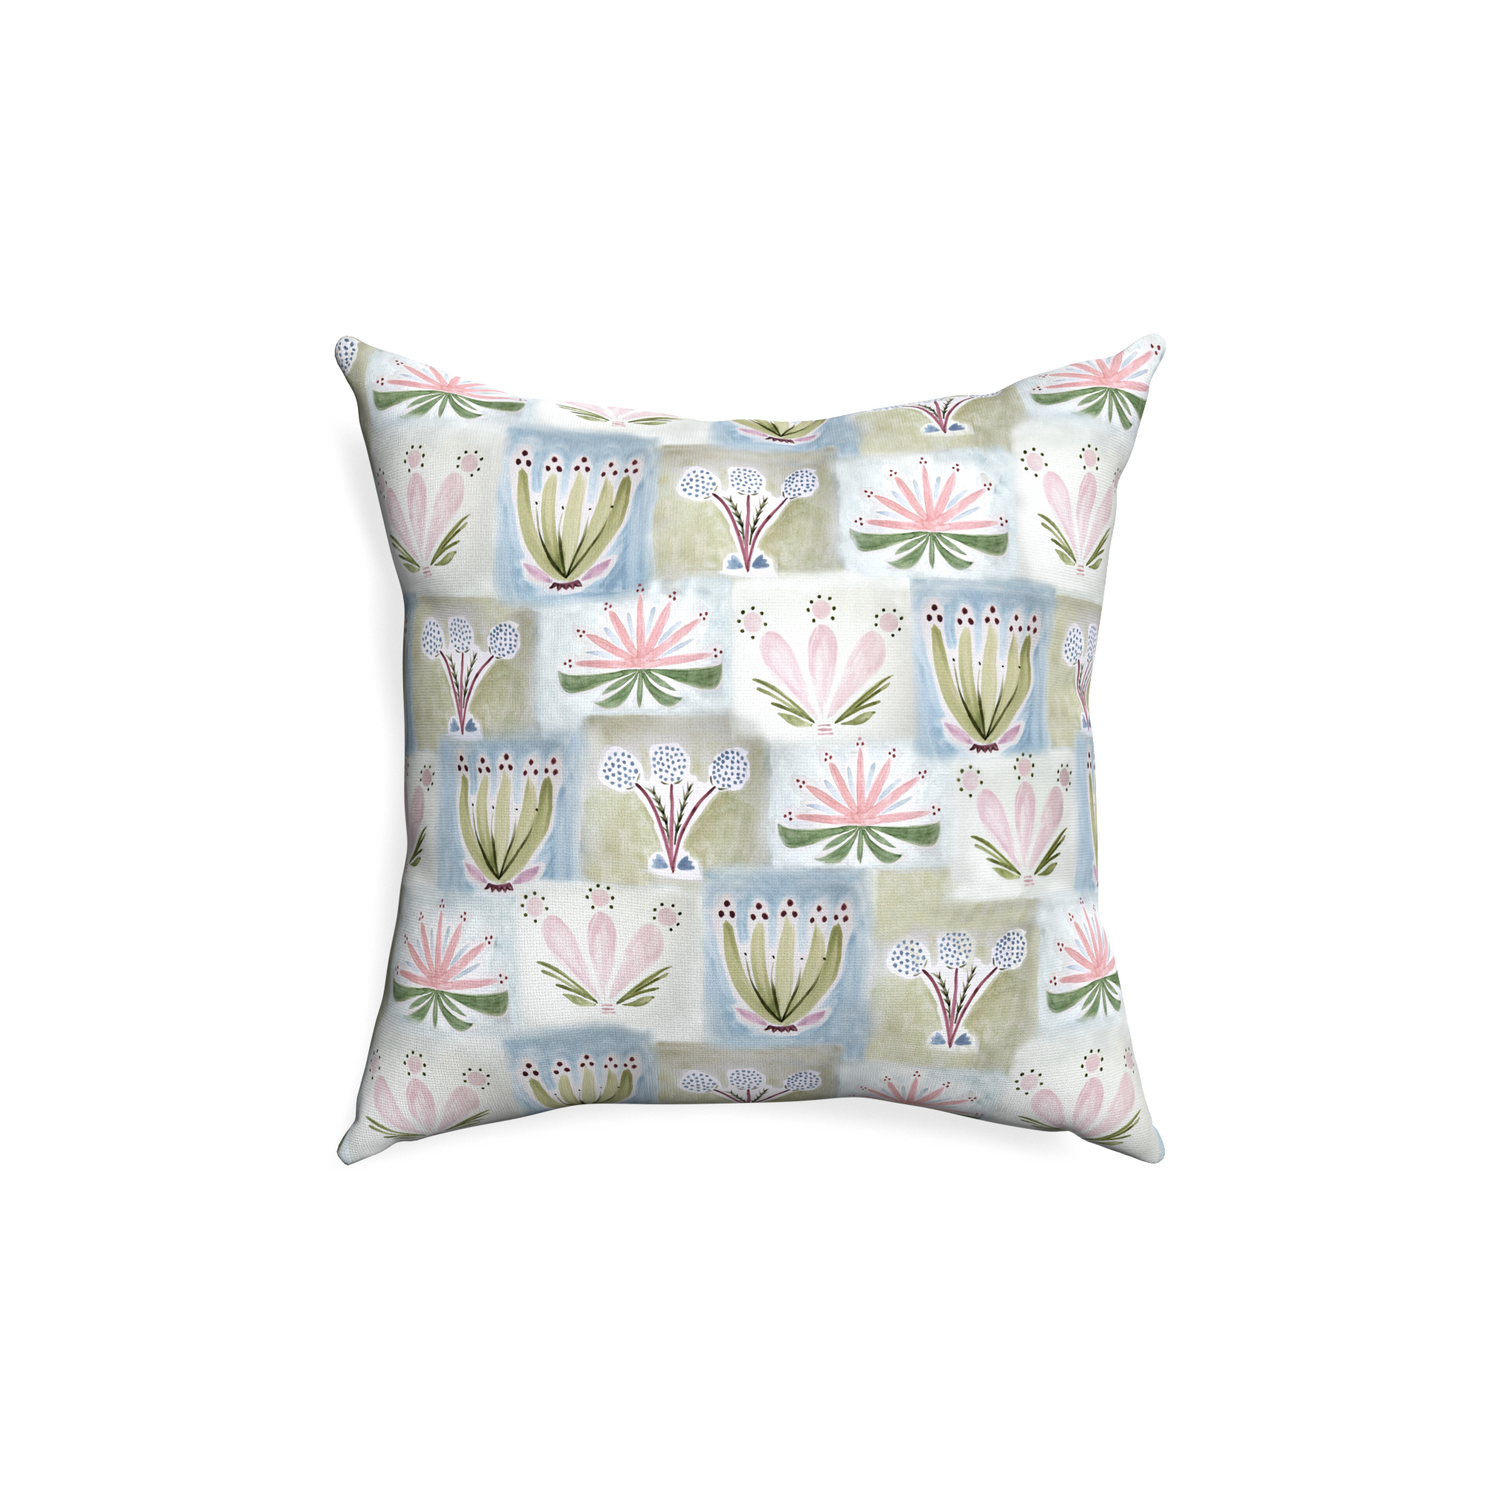 18-square harper custom hand-painted floralpillow with none on white background